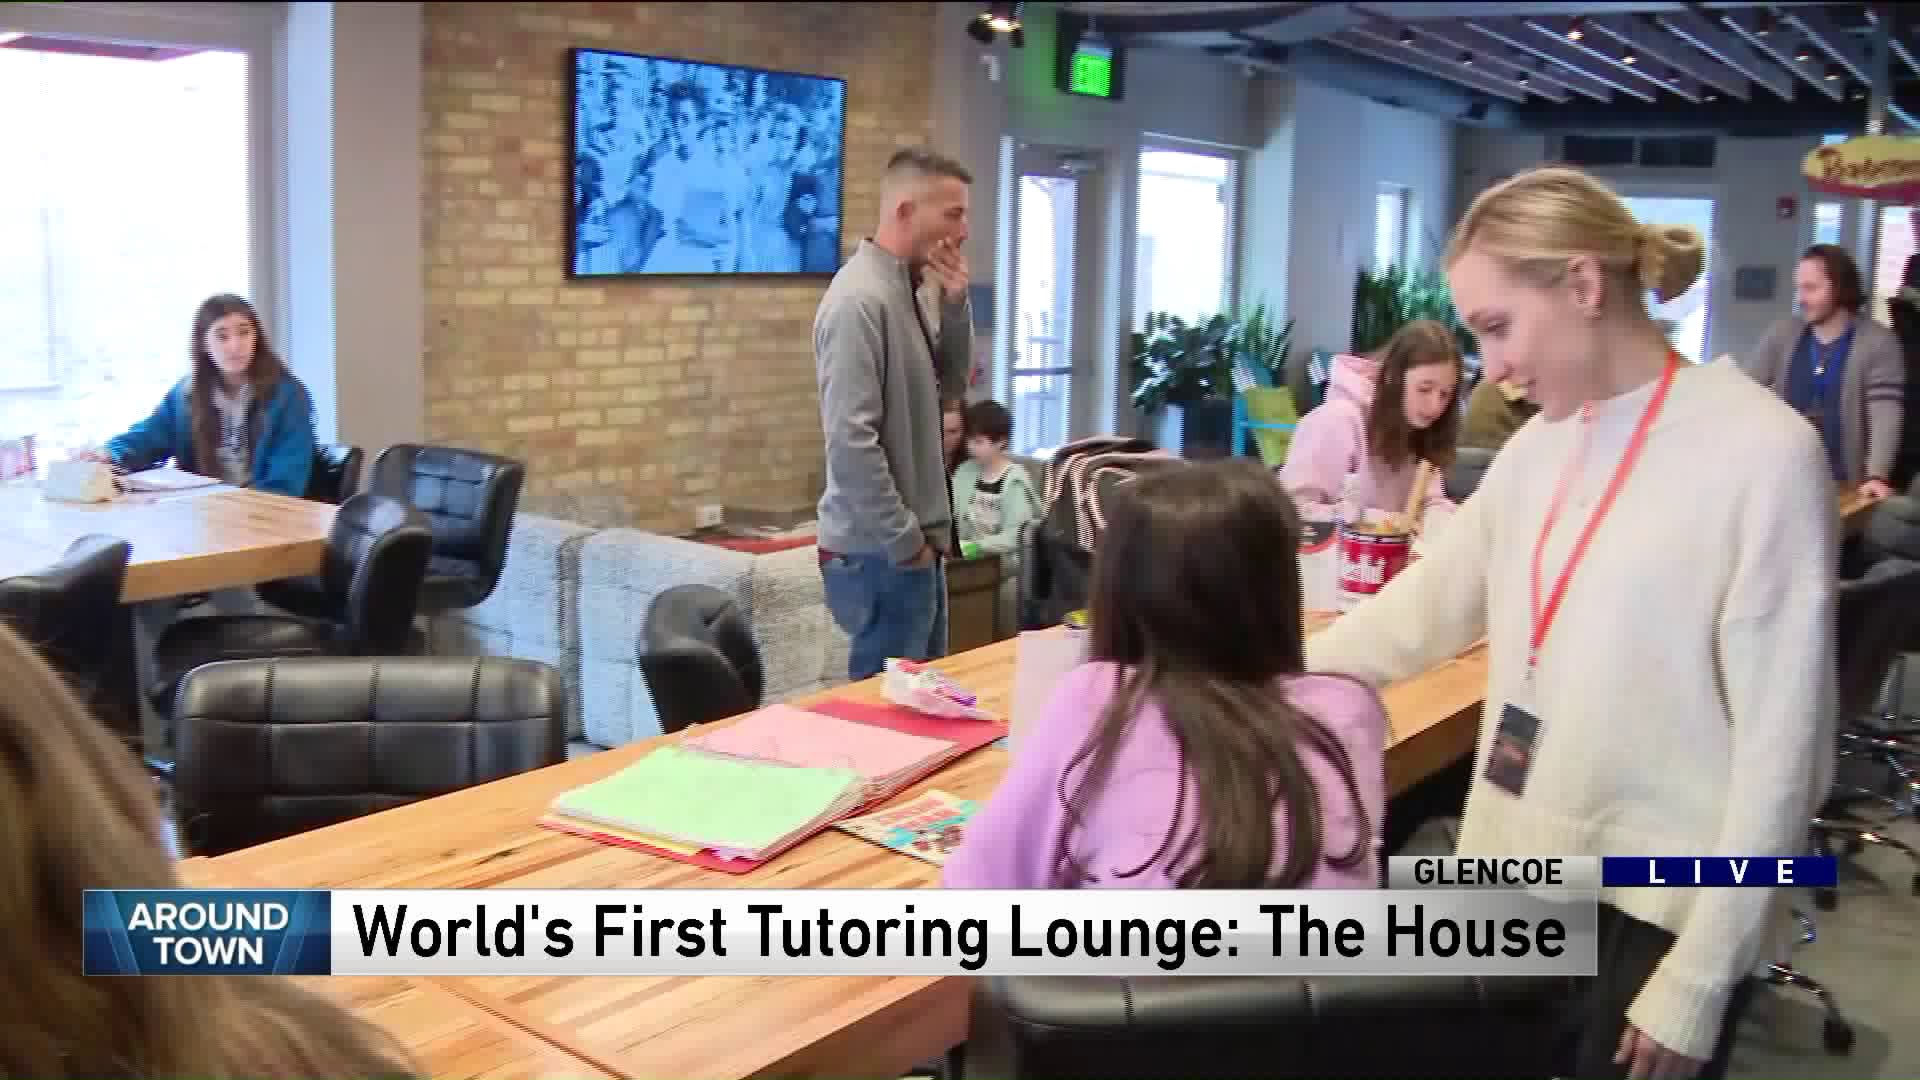 Around Town explores the world’s first tutoring lounge: The House